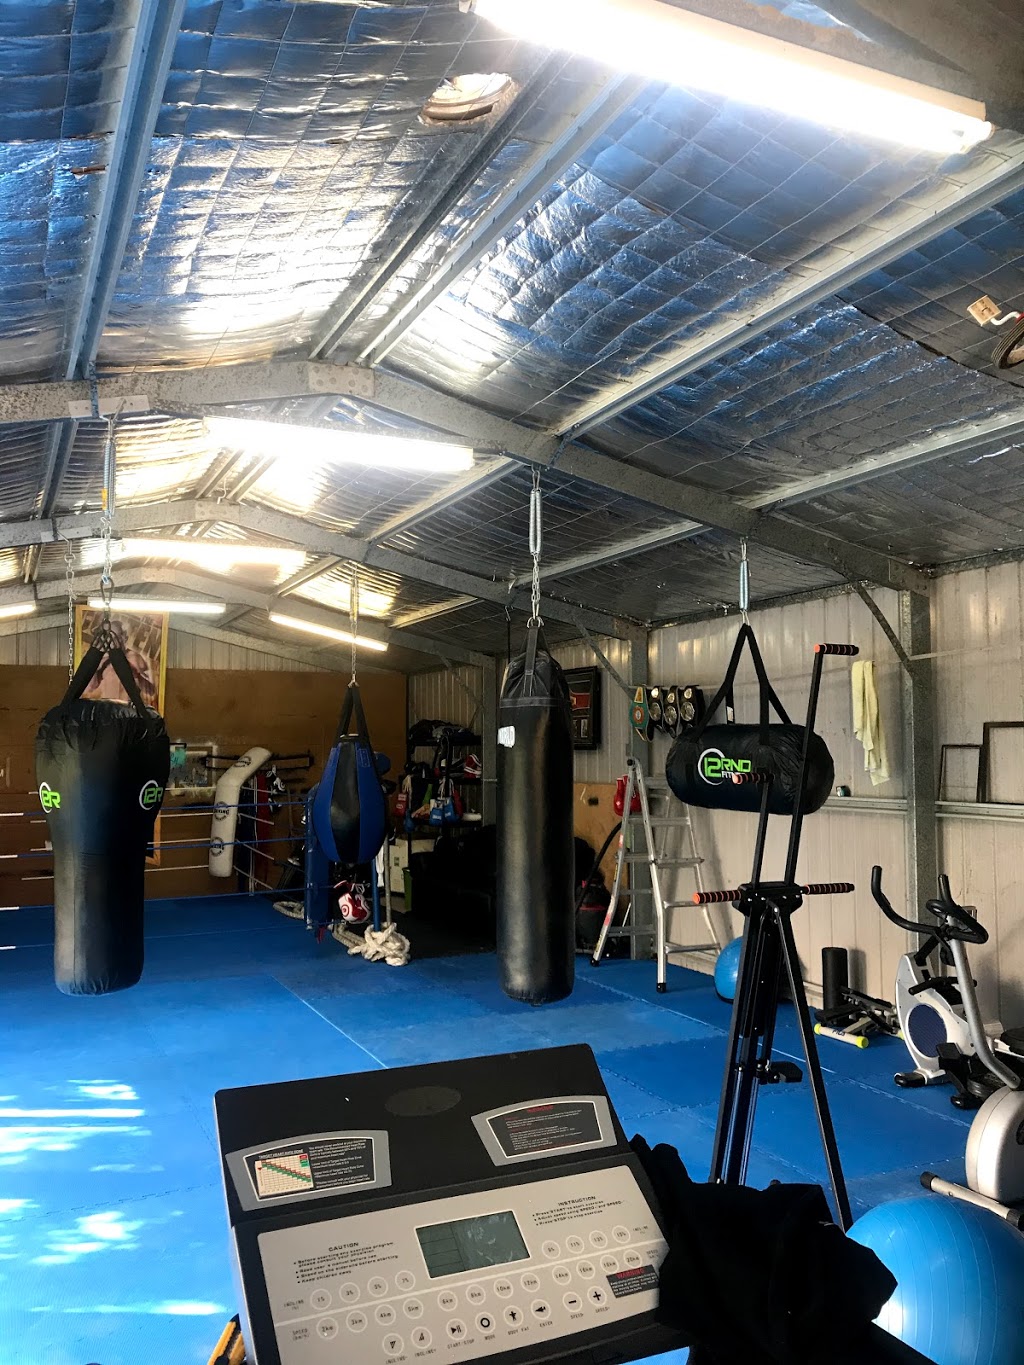 Compound Boxing Gymnasium | 28 Colwill Cres, Wolffdene QLD 4207, Australia | Phone: 0401 707 381